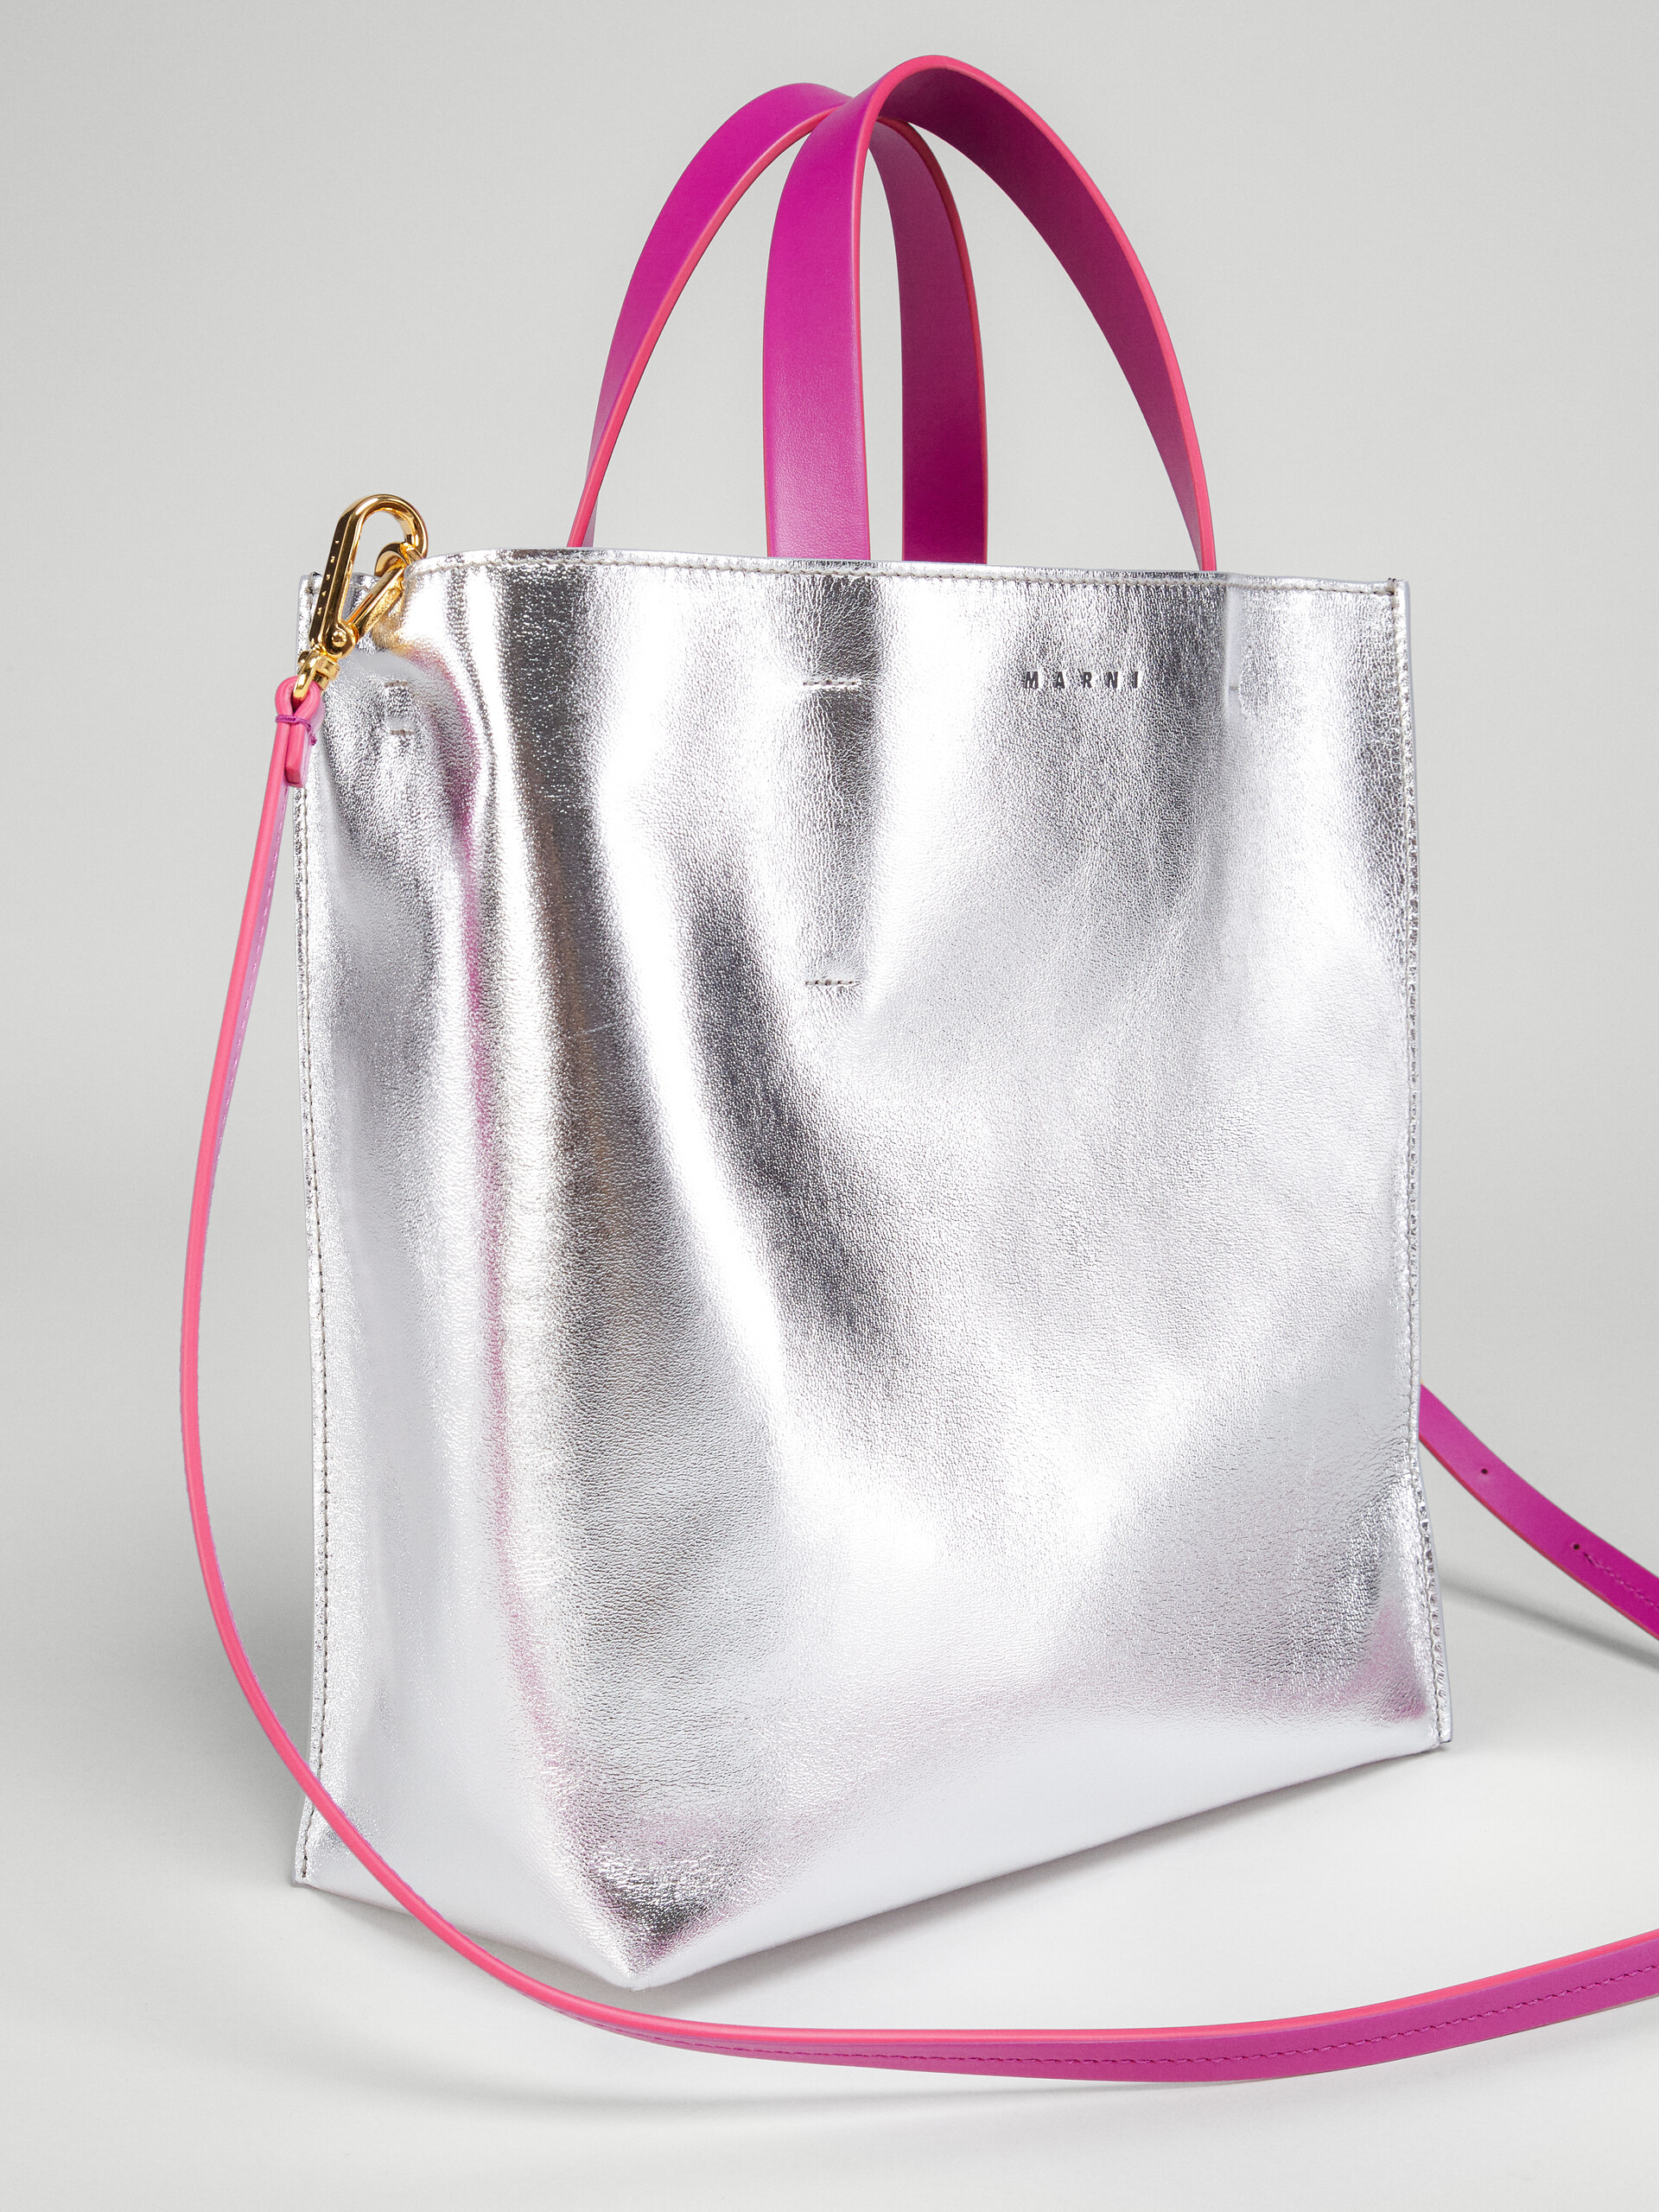 MUSEO SOFT small bag in silver and black metallic leather - Shopping Bags - Image 3